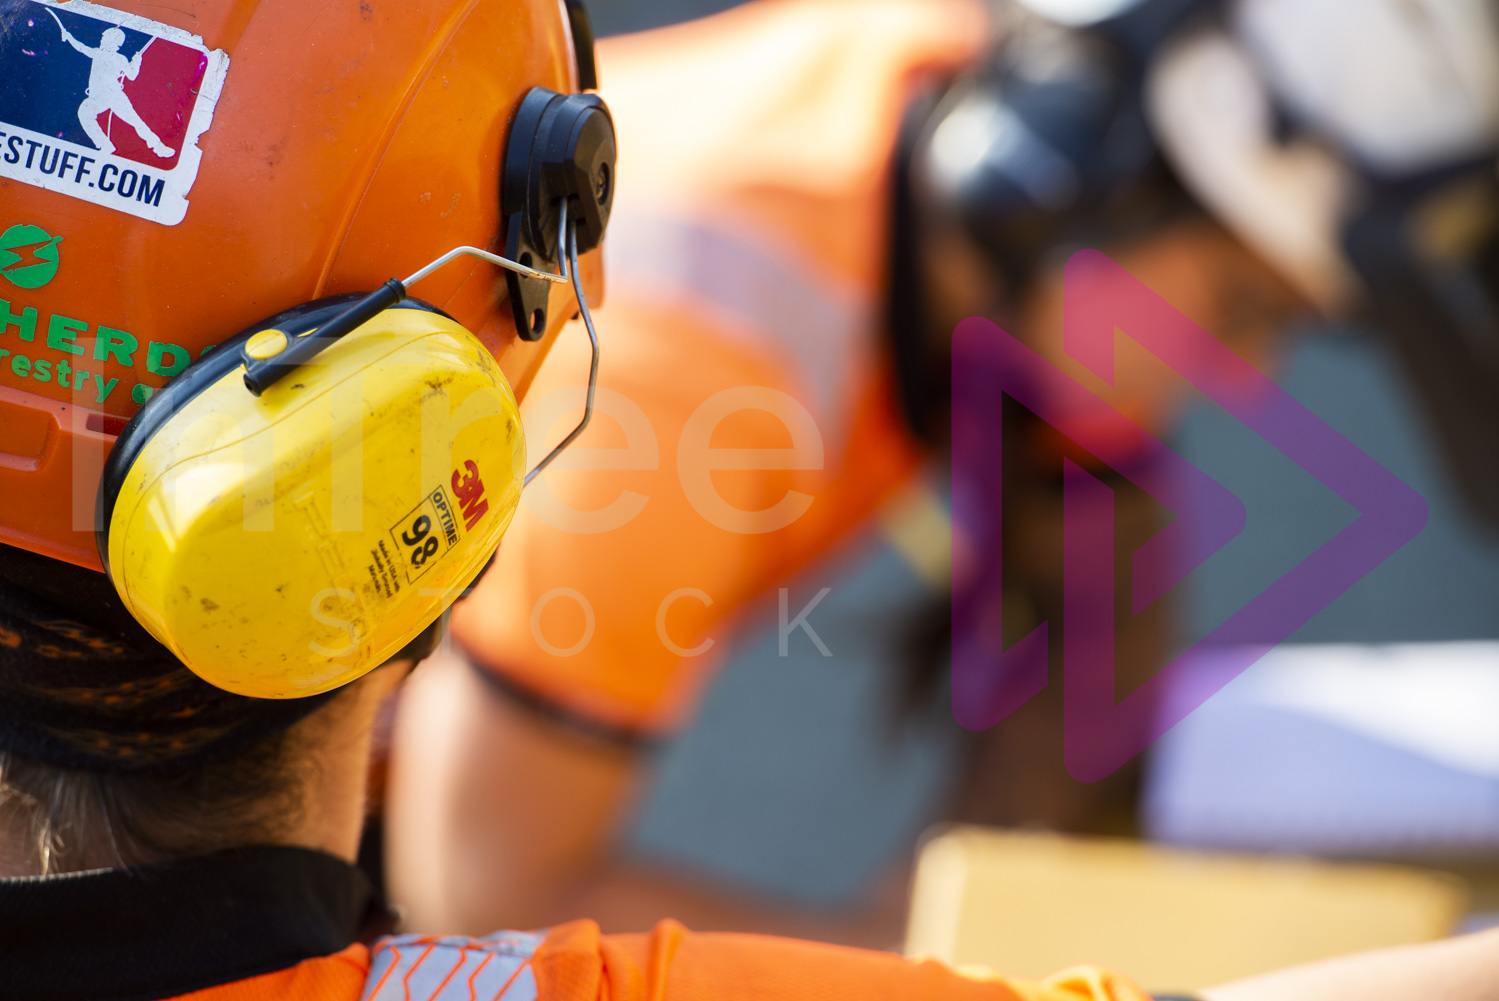 Yellow 3M Ear defender on helmet with woman blurred in background